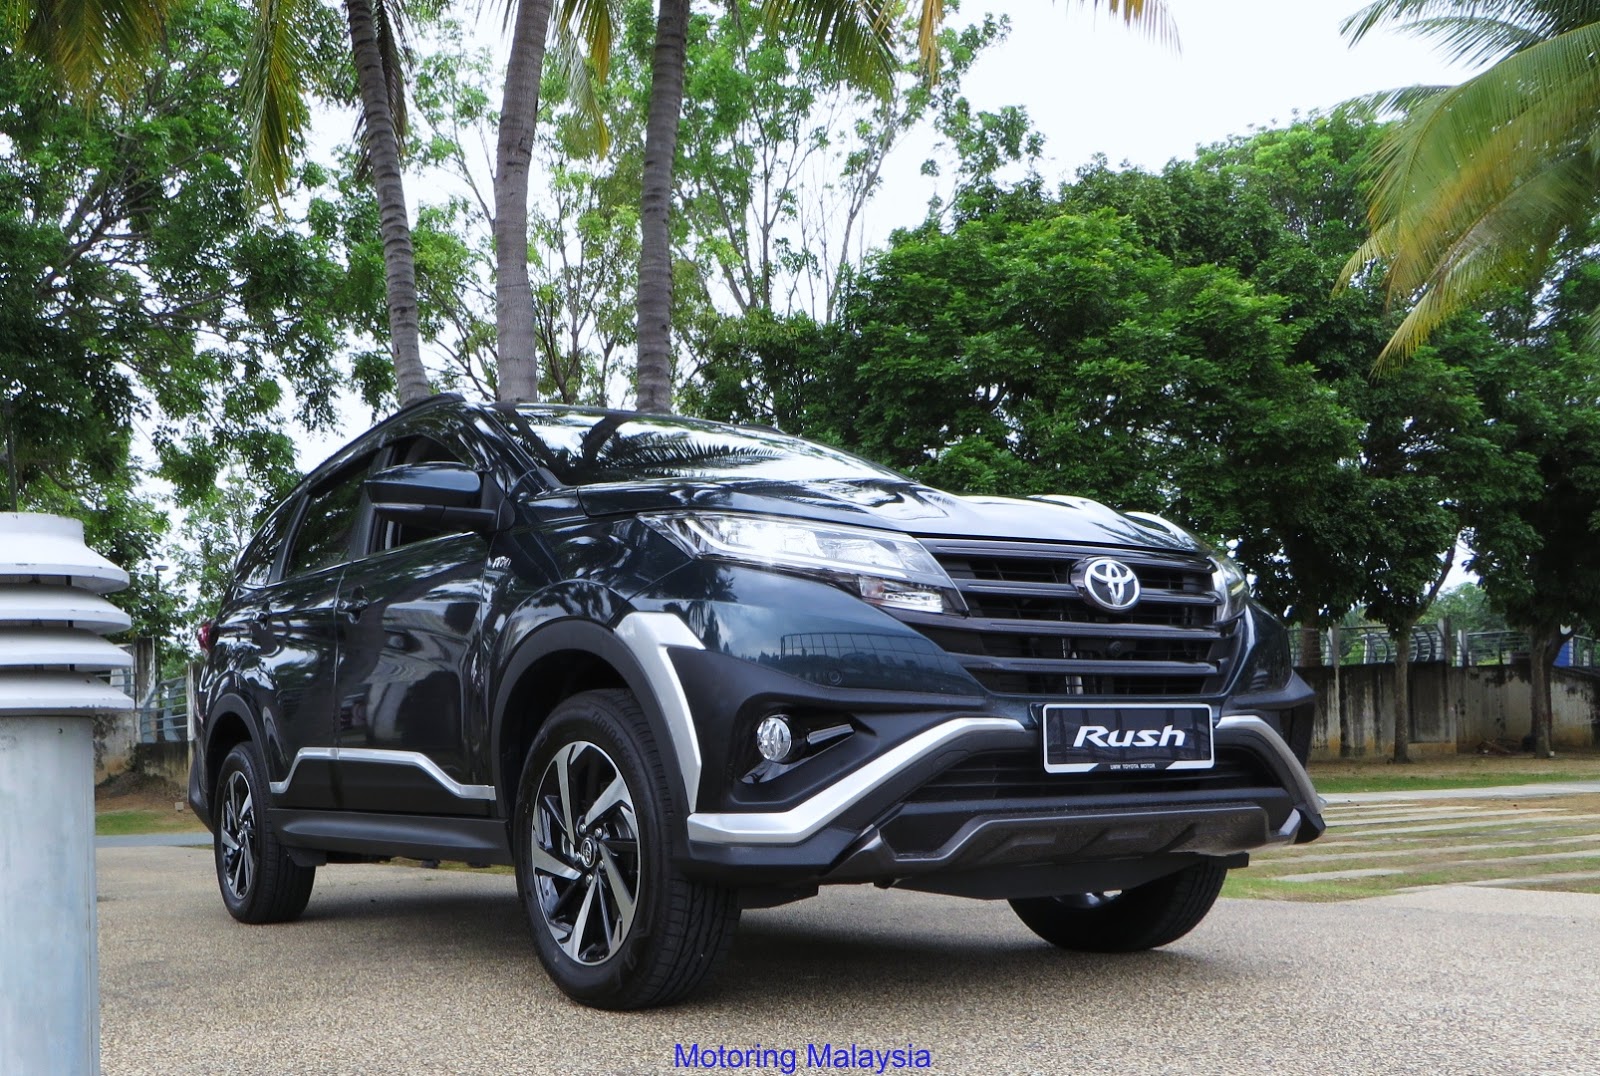 MotoringMalaysia TEST DRIVE  First Impressions of the New 2019